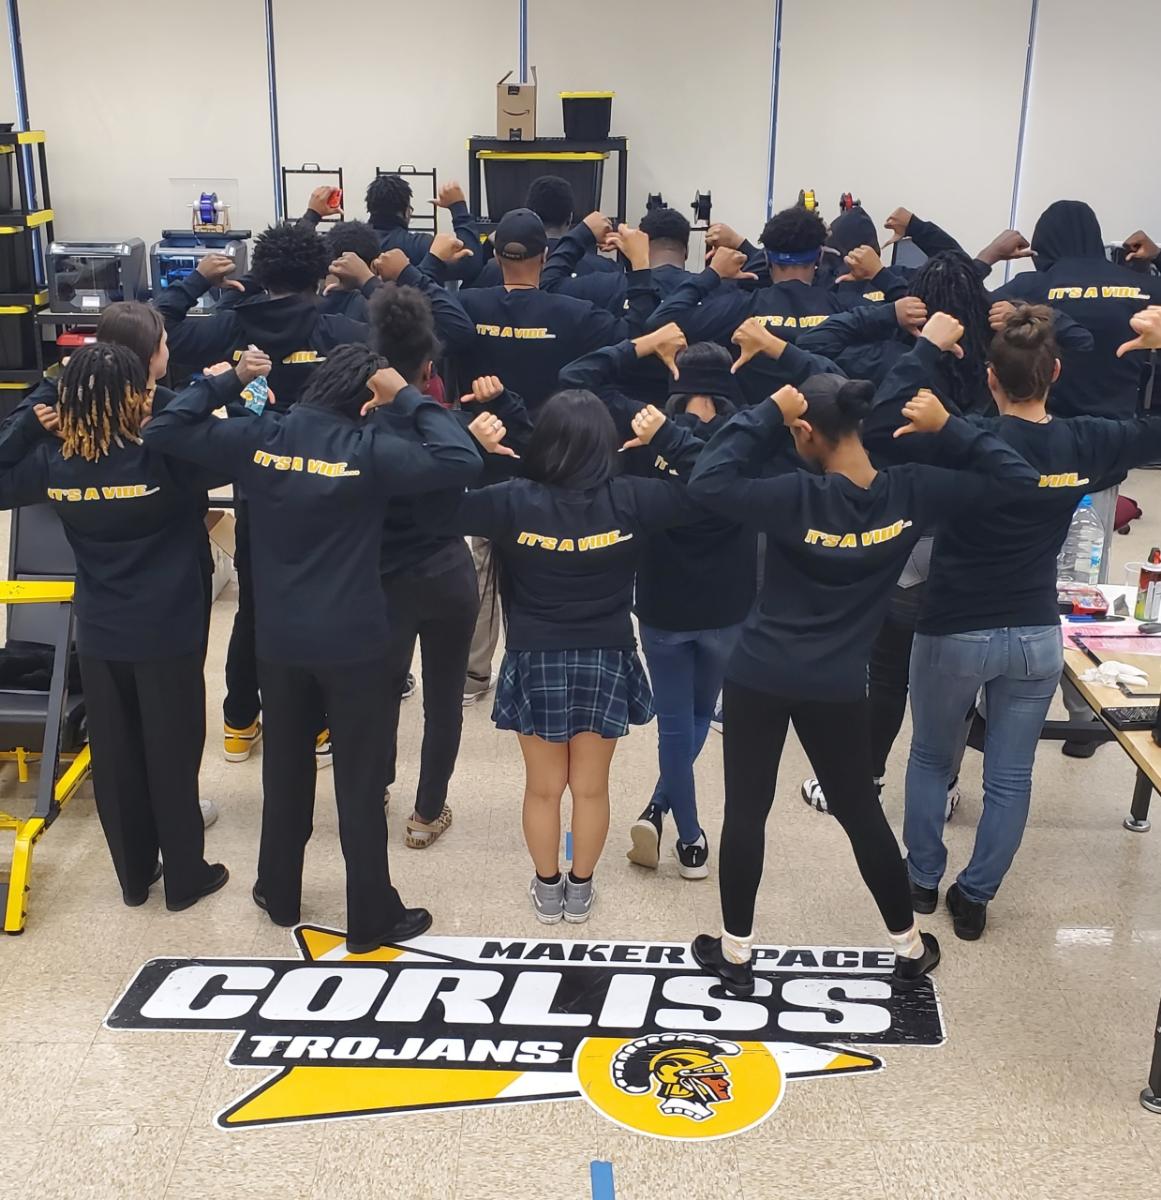 Corliss Maker's Space
It's a Vibe!!!
We are Corliss...We are ELITE!!!
@ChiPubSchools @CorlissSTEMHS @ECCECPS @N17CPS @HopeDealerCH @CPSCareerReady @cpsSTEM
#PursuingExcellence